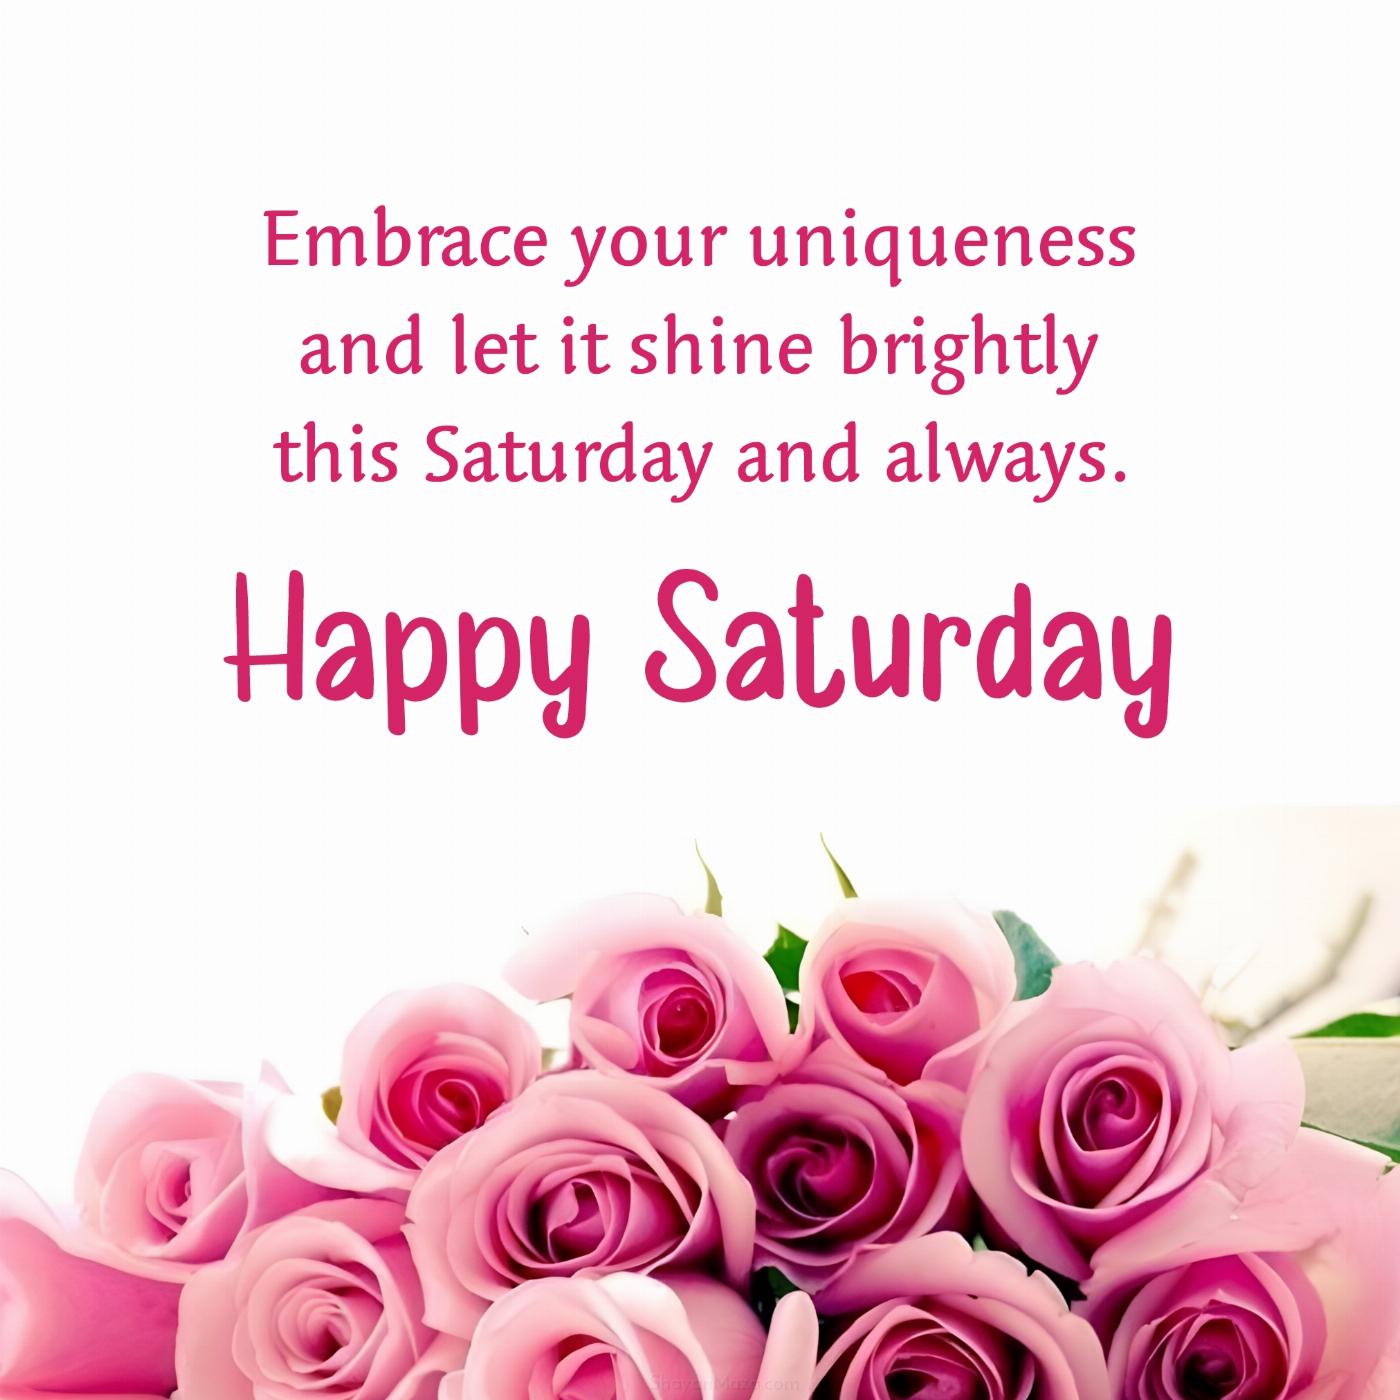 Embrace your uniqueness and let it shine brightly this Saturday